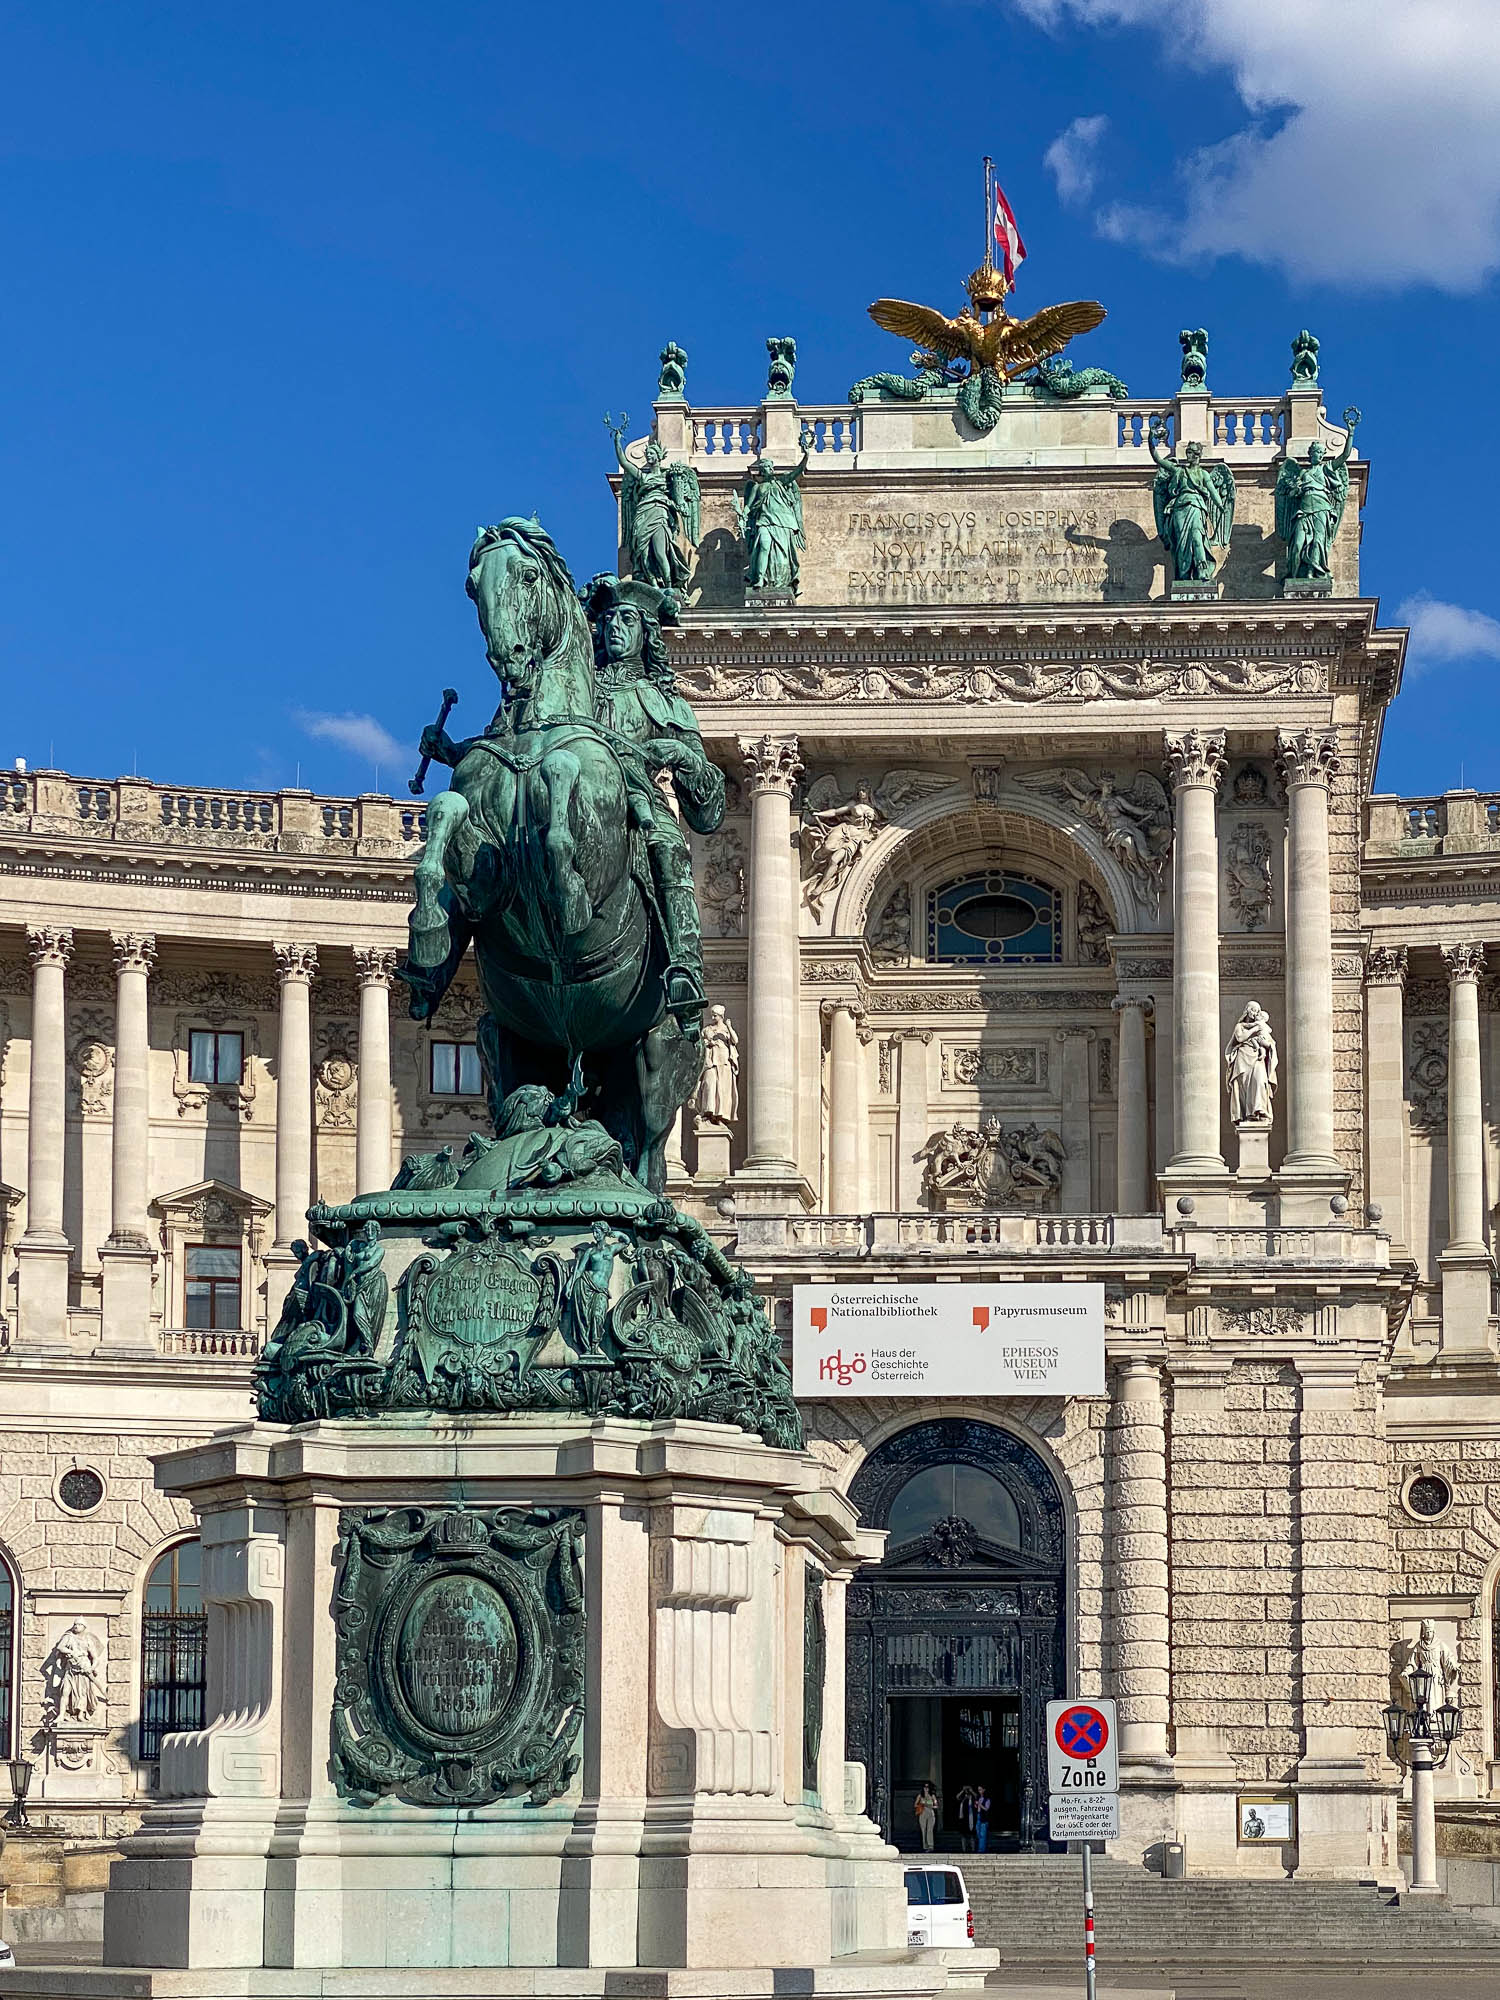 A bronze equestrian statue stands in front of an ornate building with sculptures, columns, and a winged figure atop its façade under a blue sky.